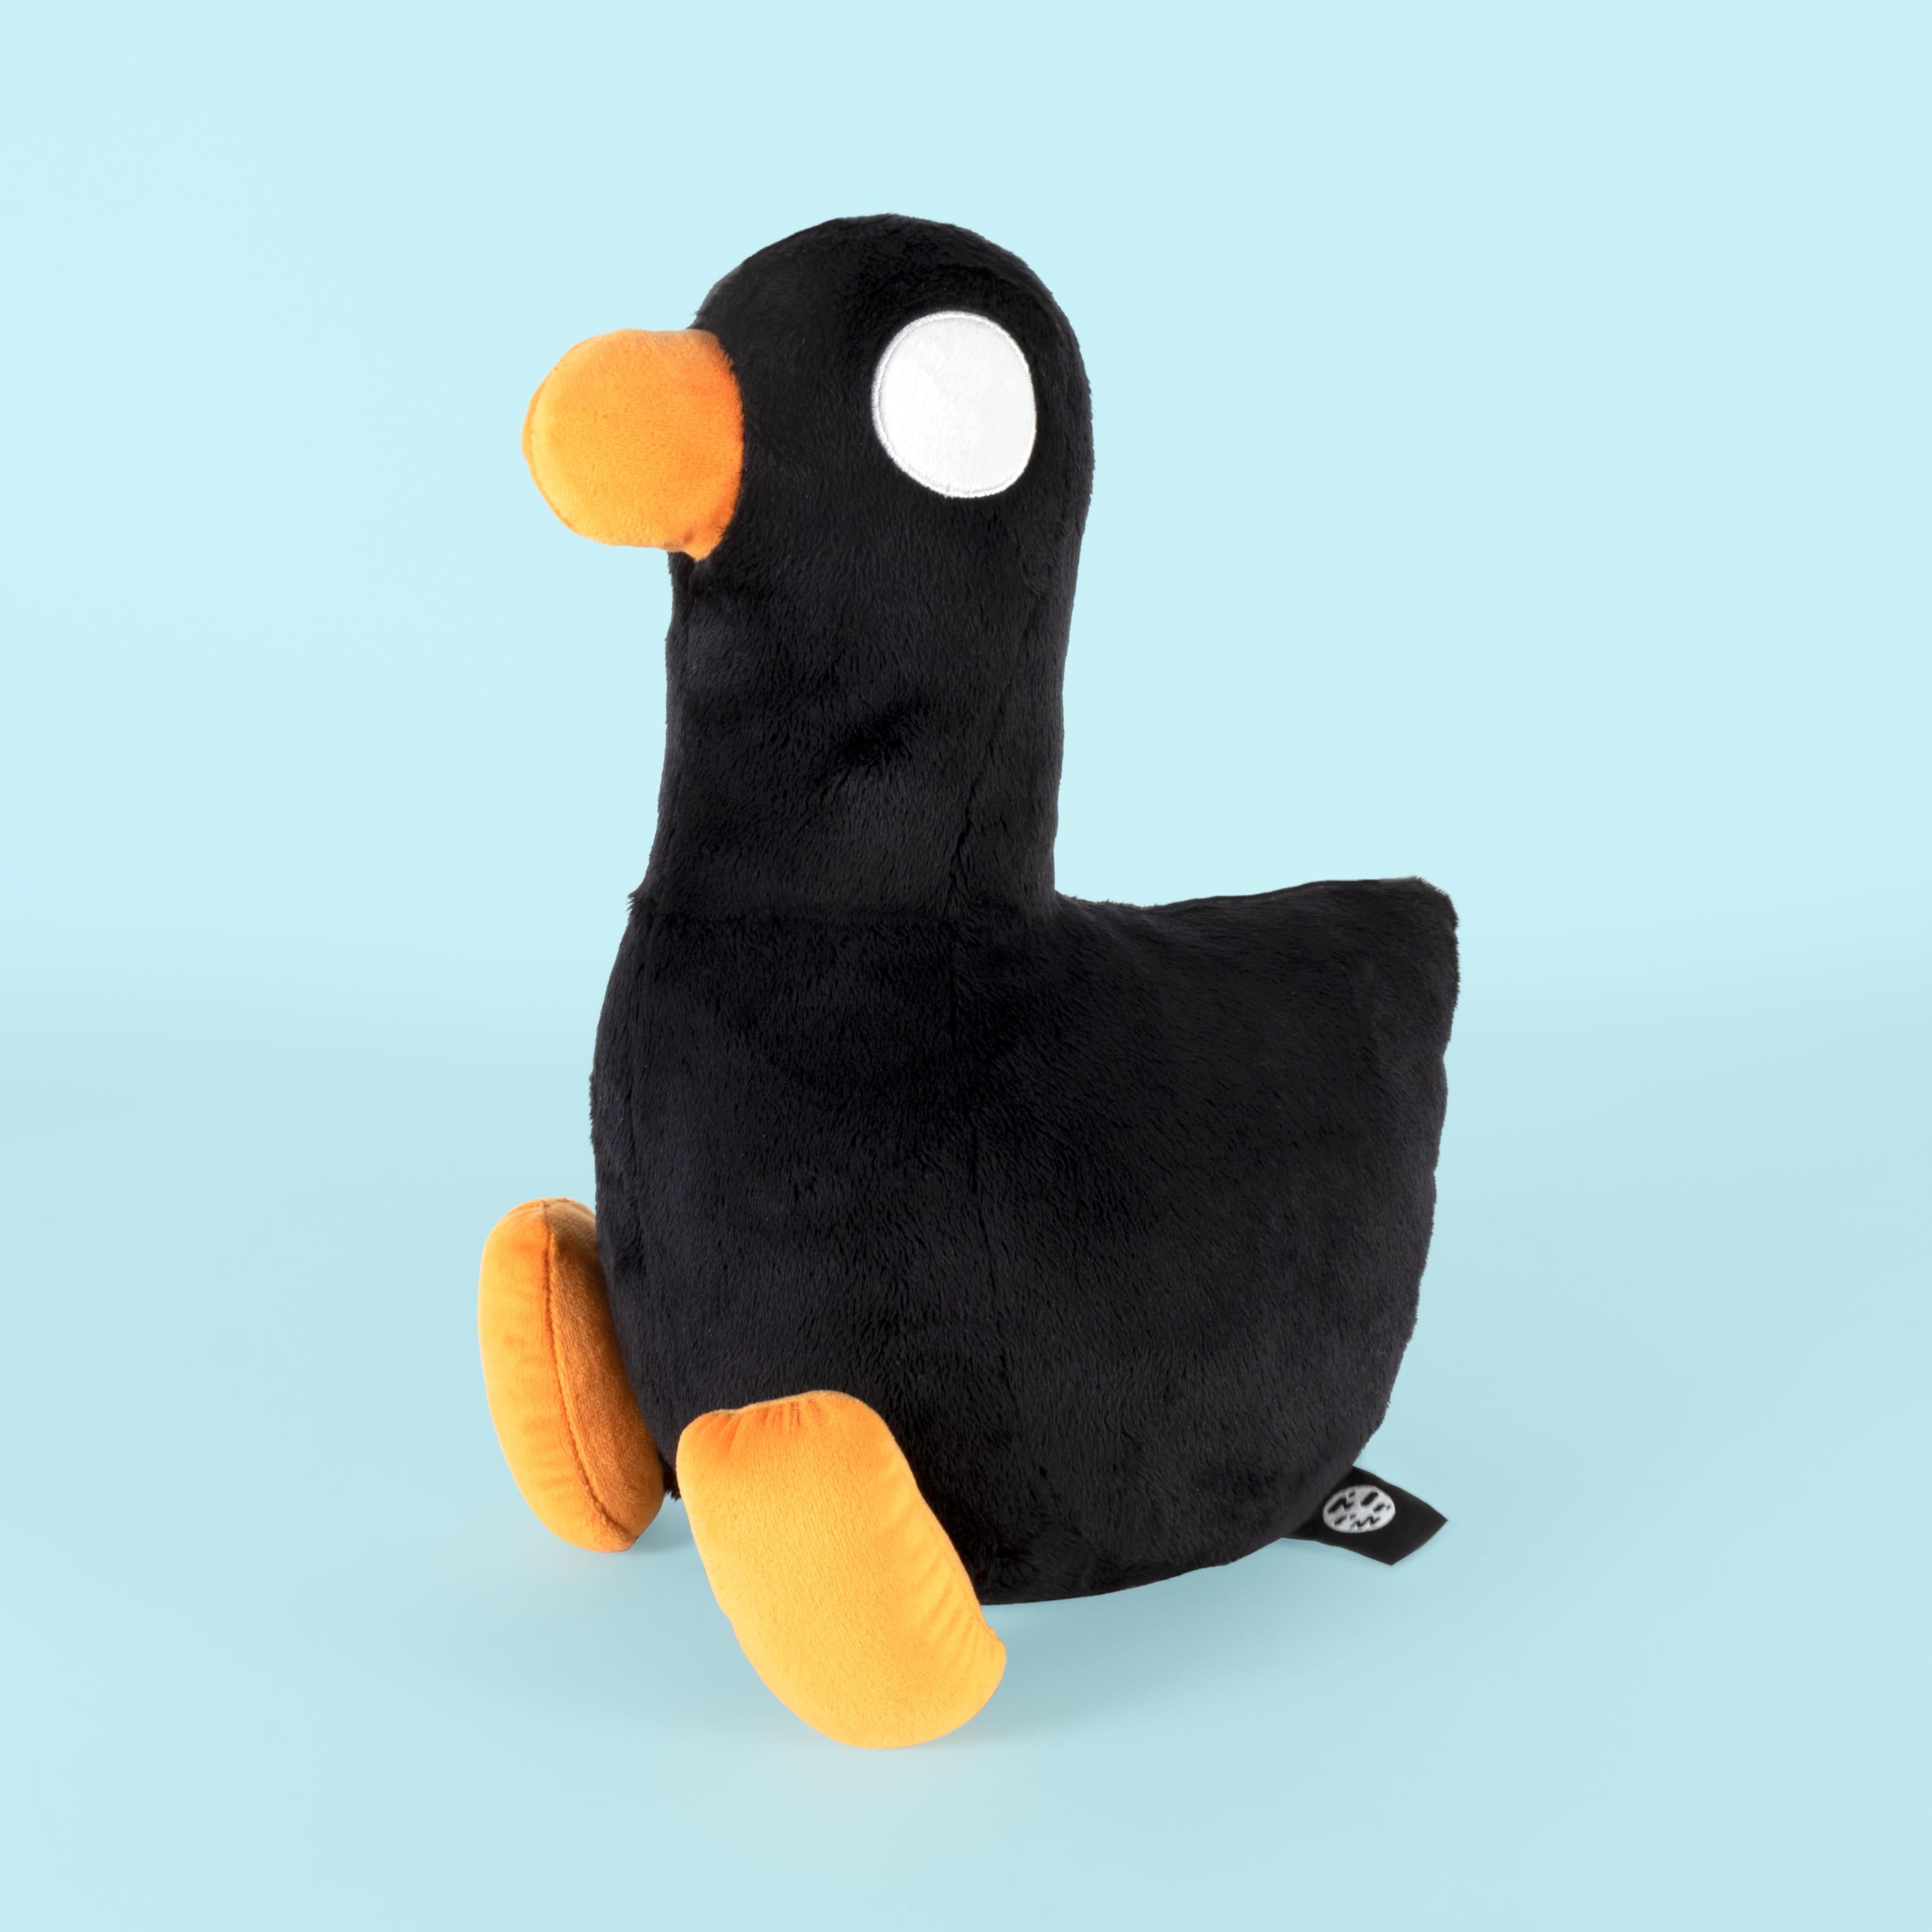 The Official Plushie – the shop